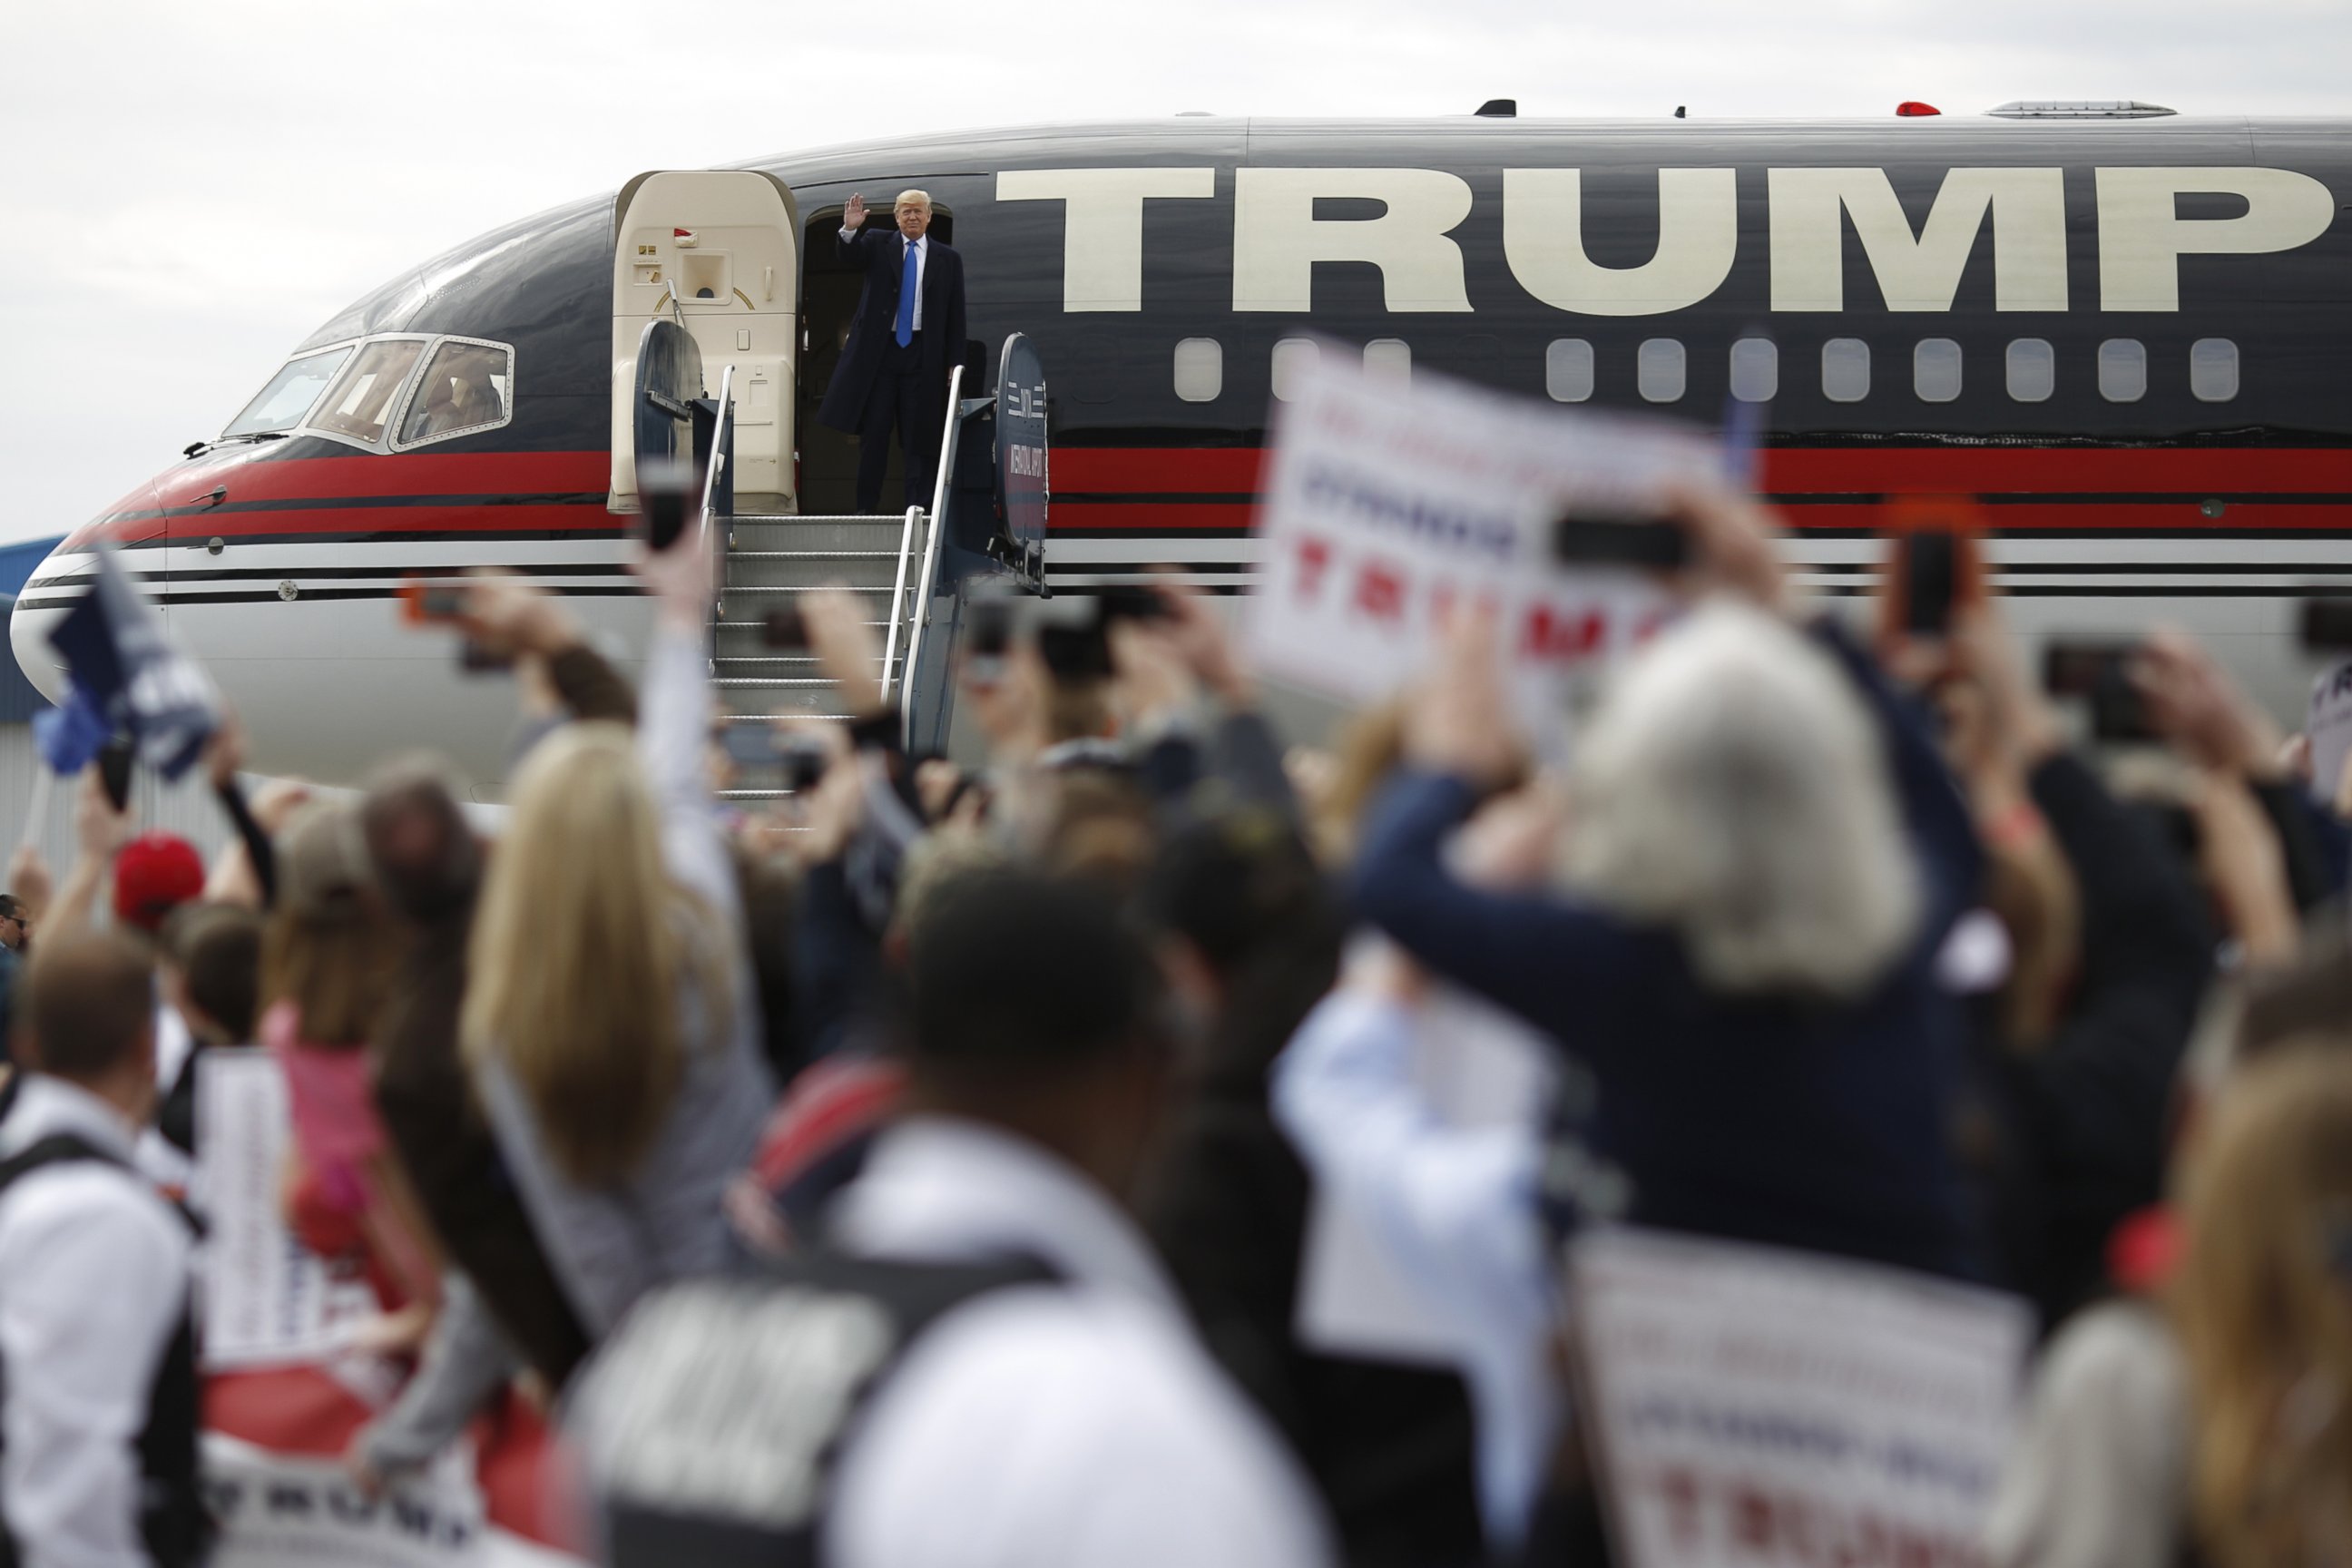 PHOTO: Republican presidential candidate Donald Trump waves to attendees while disembarking from his airplane at a campaign event in Dayton, Ohio, U.S., March 12, 2016. 